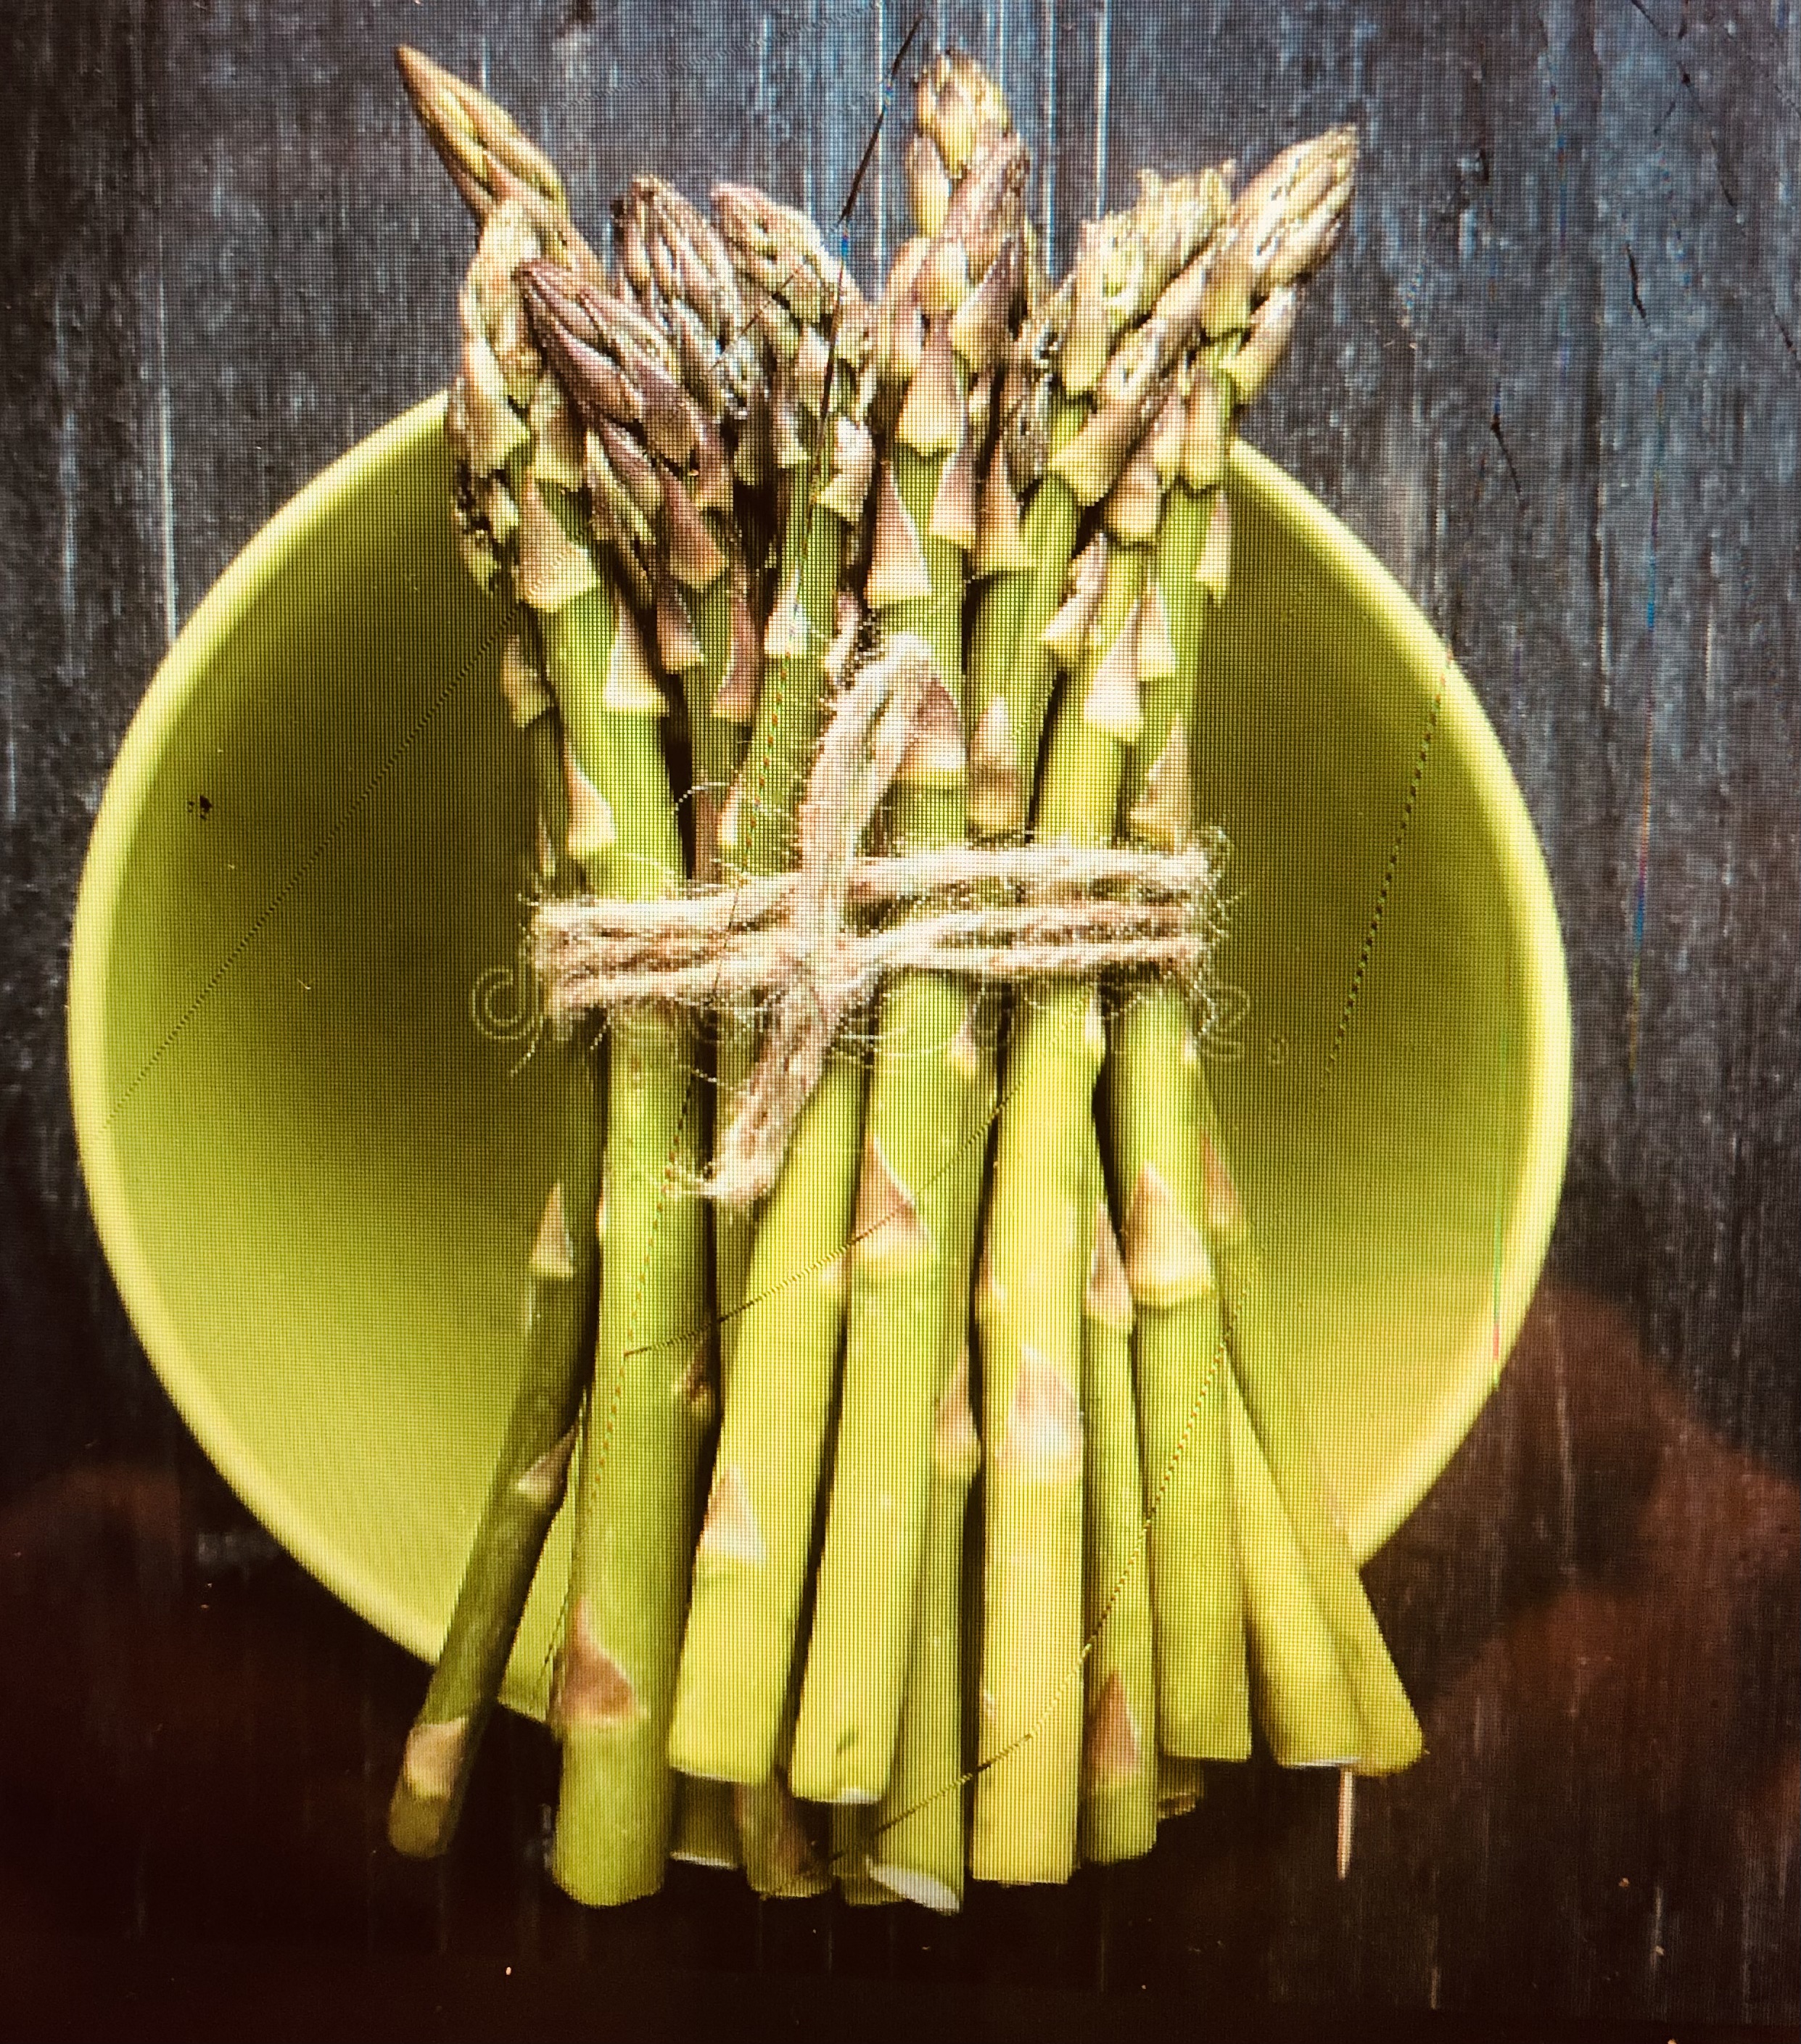 A color photo of a bundle of asparagus tied with twine and sitting atop a green bowl.